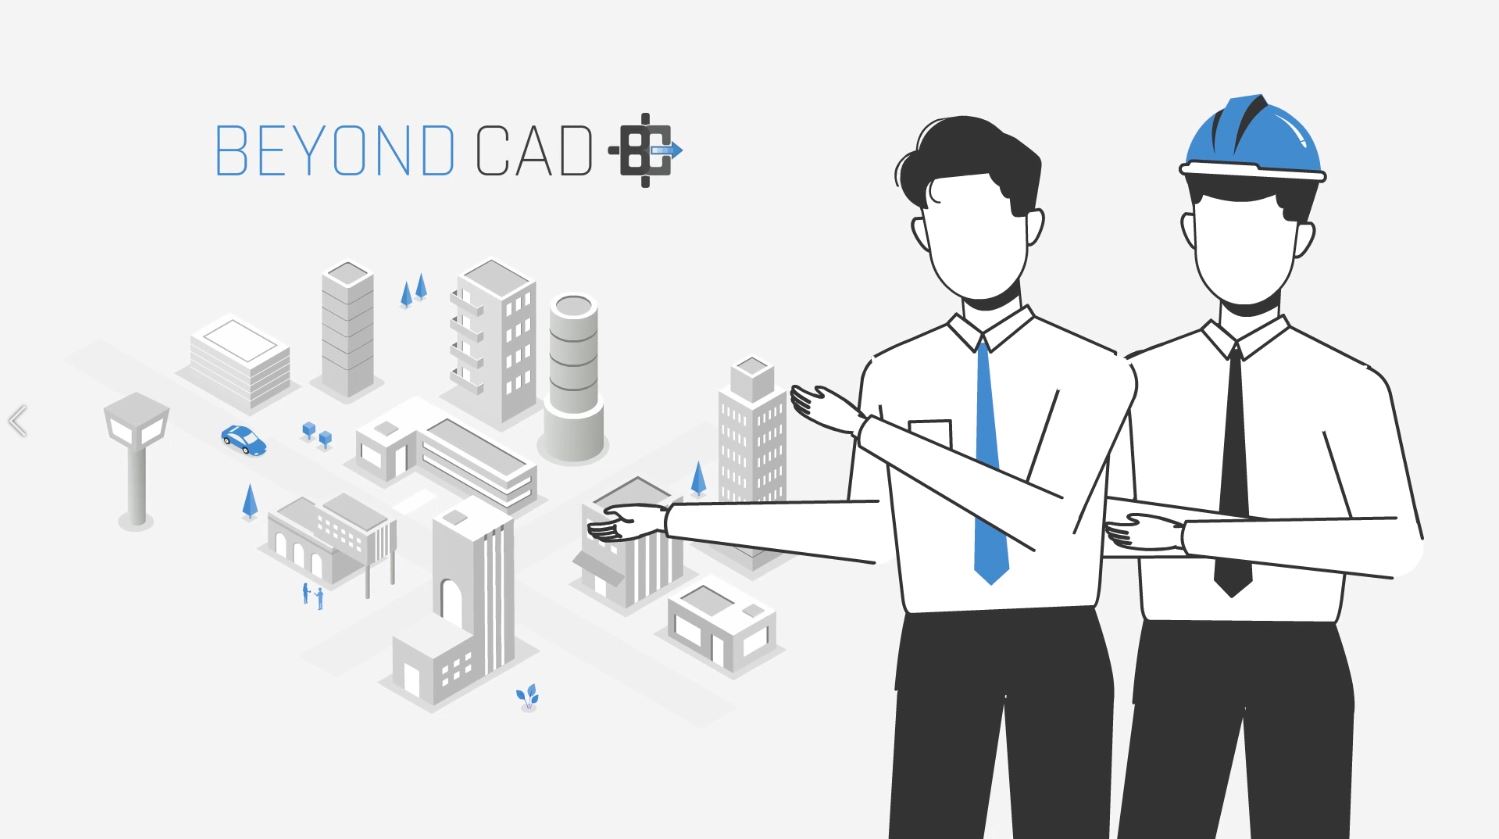 What is Beyond CAD?